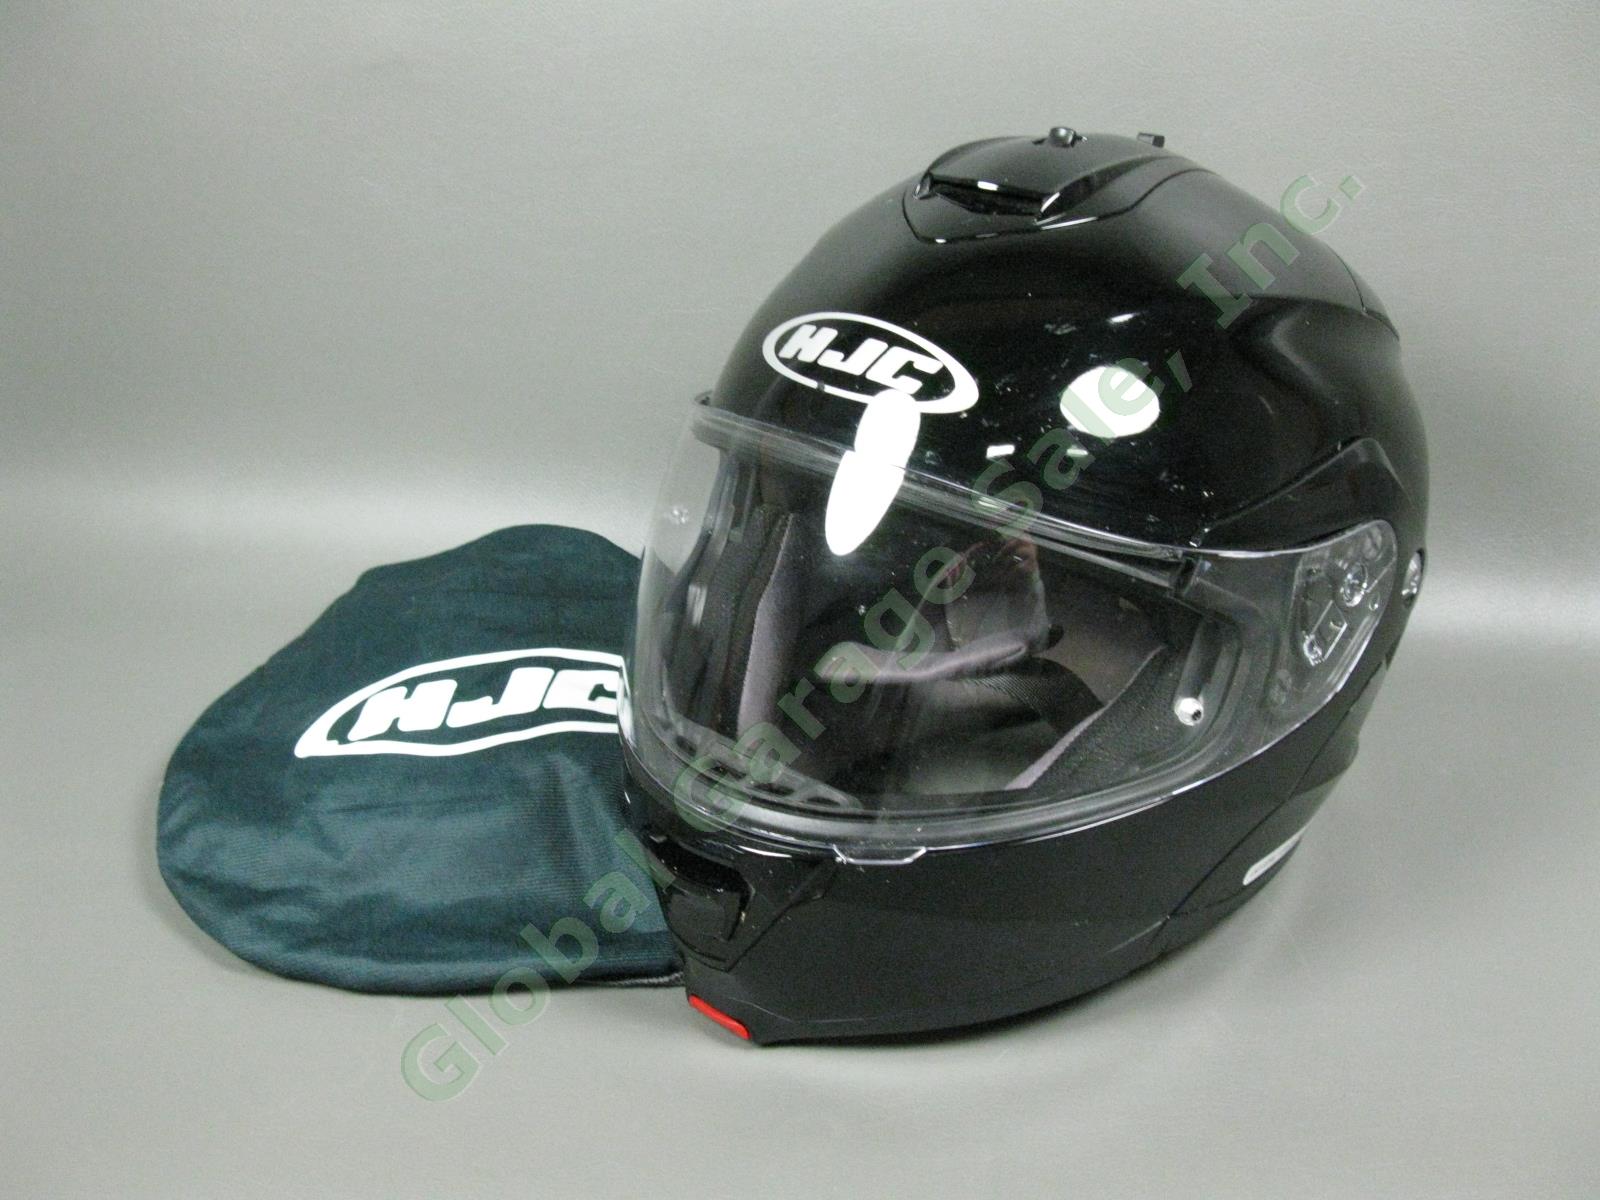 HJC IS-Max II Modular Motorcycle Helmet Size XXL Black Gloss One Owner EXC COND!